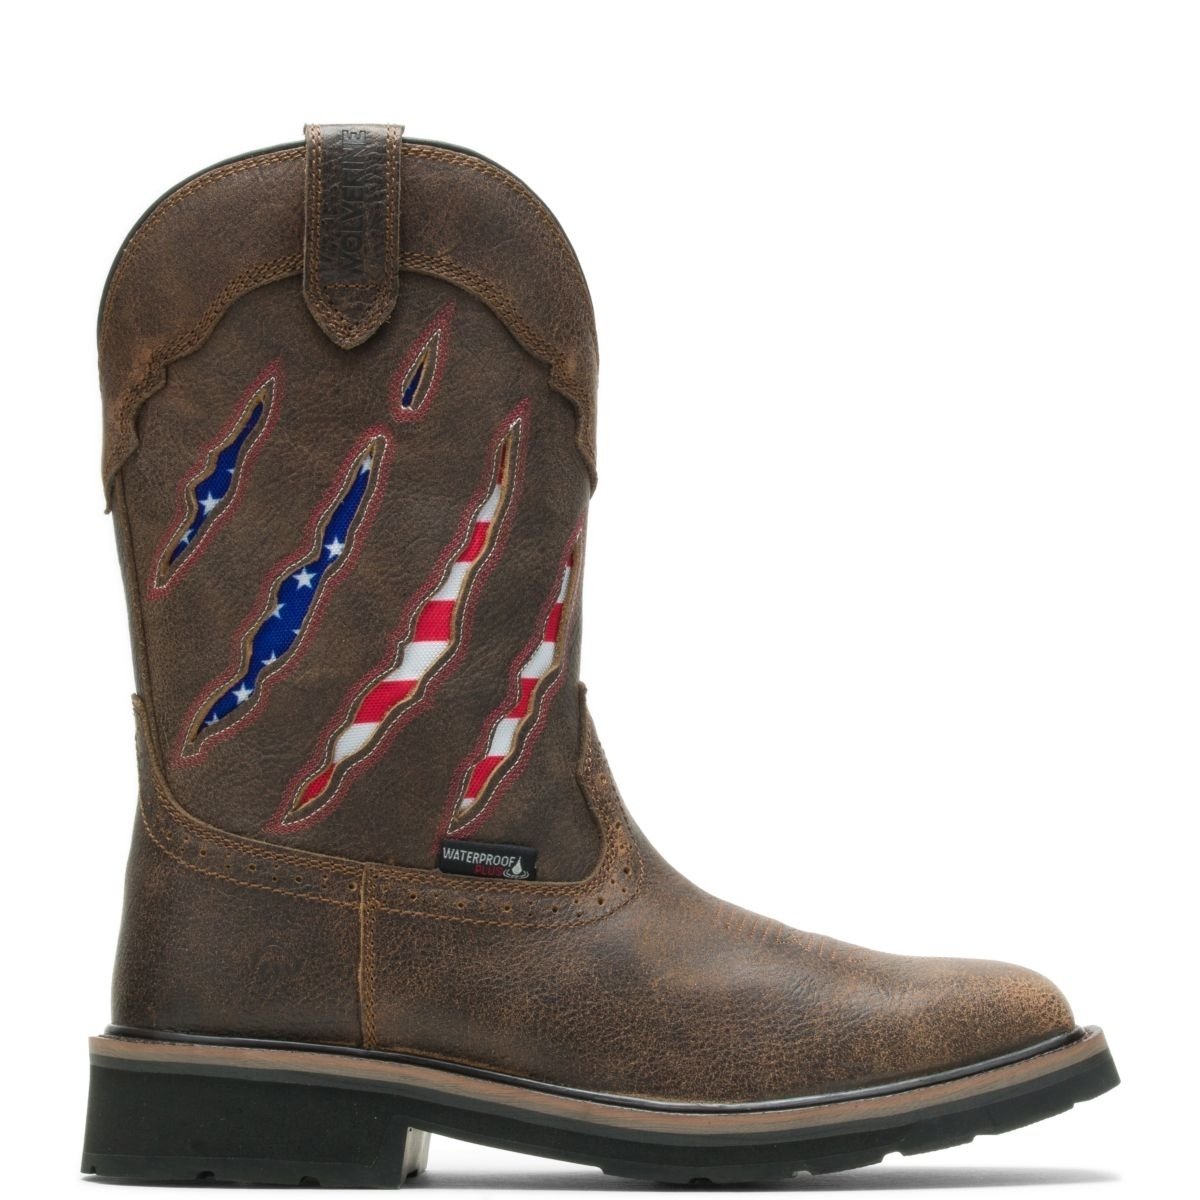 WOLVERINE Men's Rancher Claw Wellington Soft Toe Work Boot Brown/Flag - W200138 Flag/brown - Flag/brown, 10 X-Wide